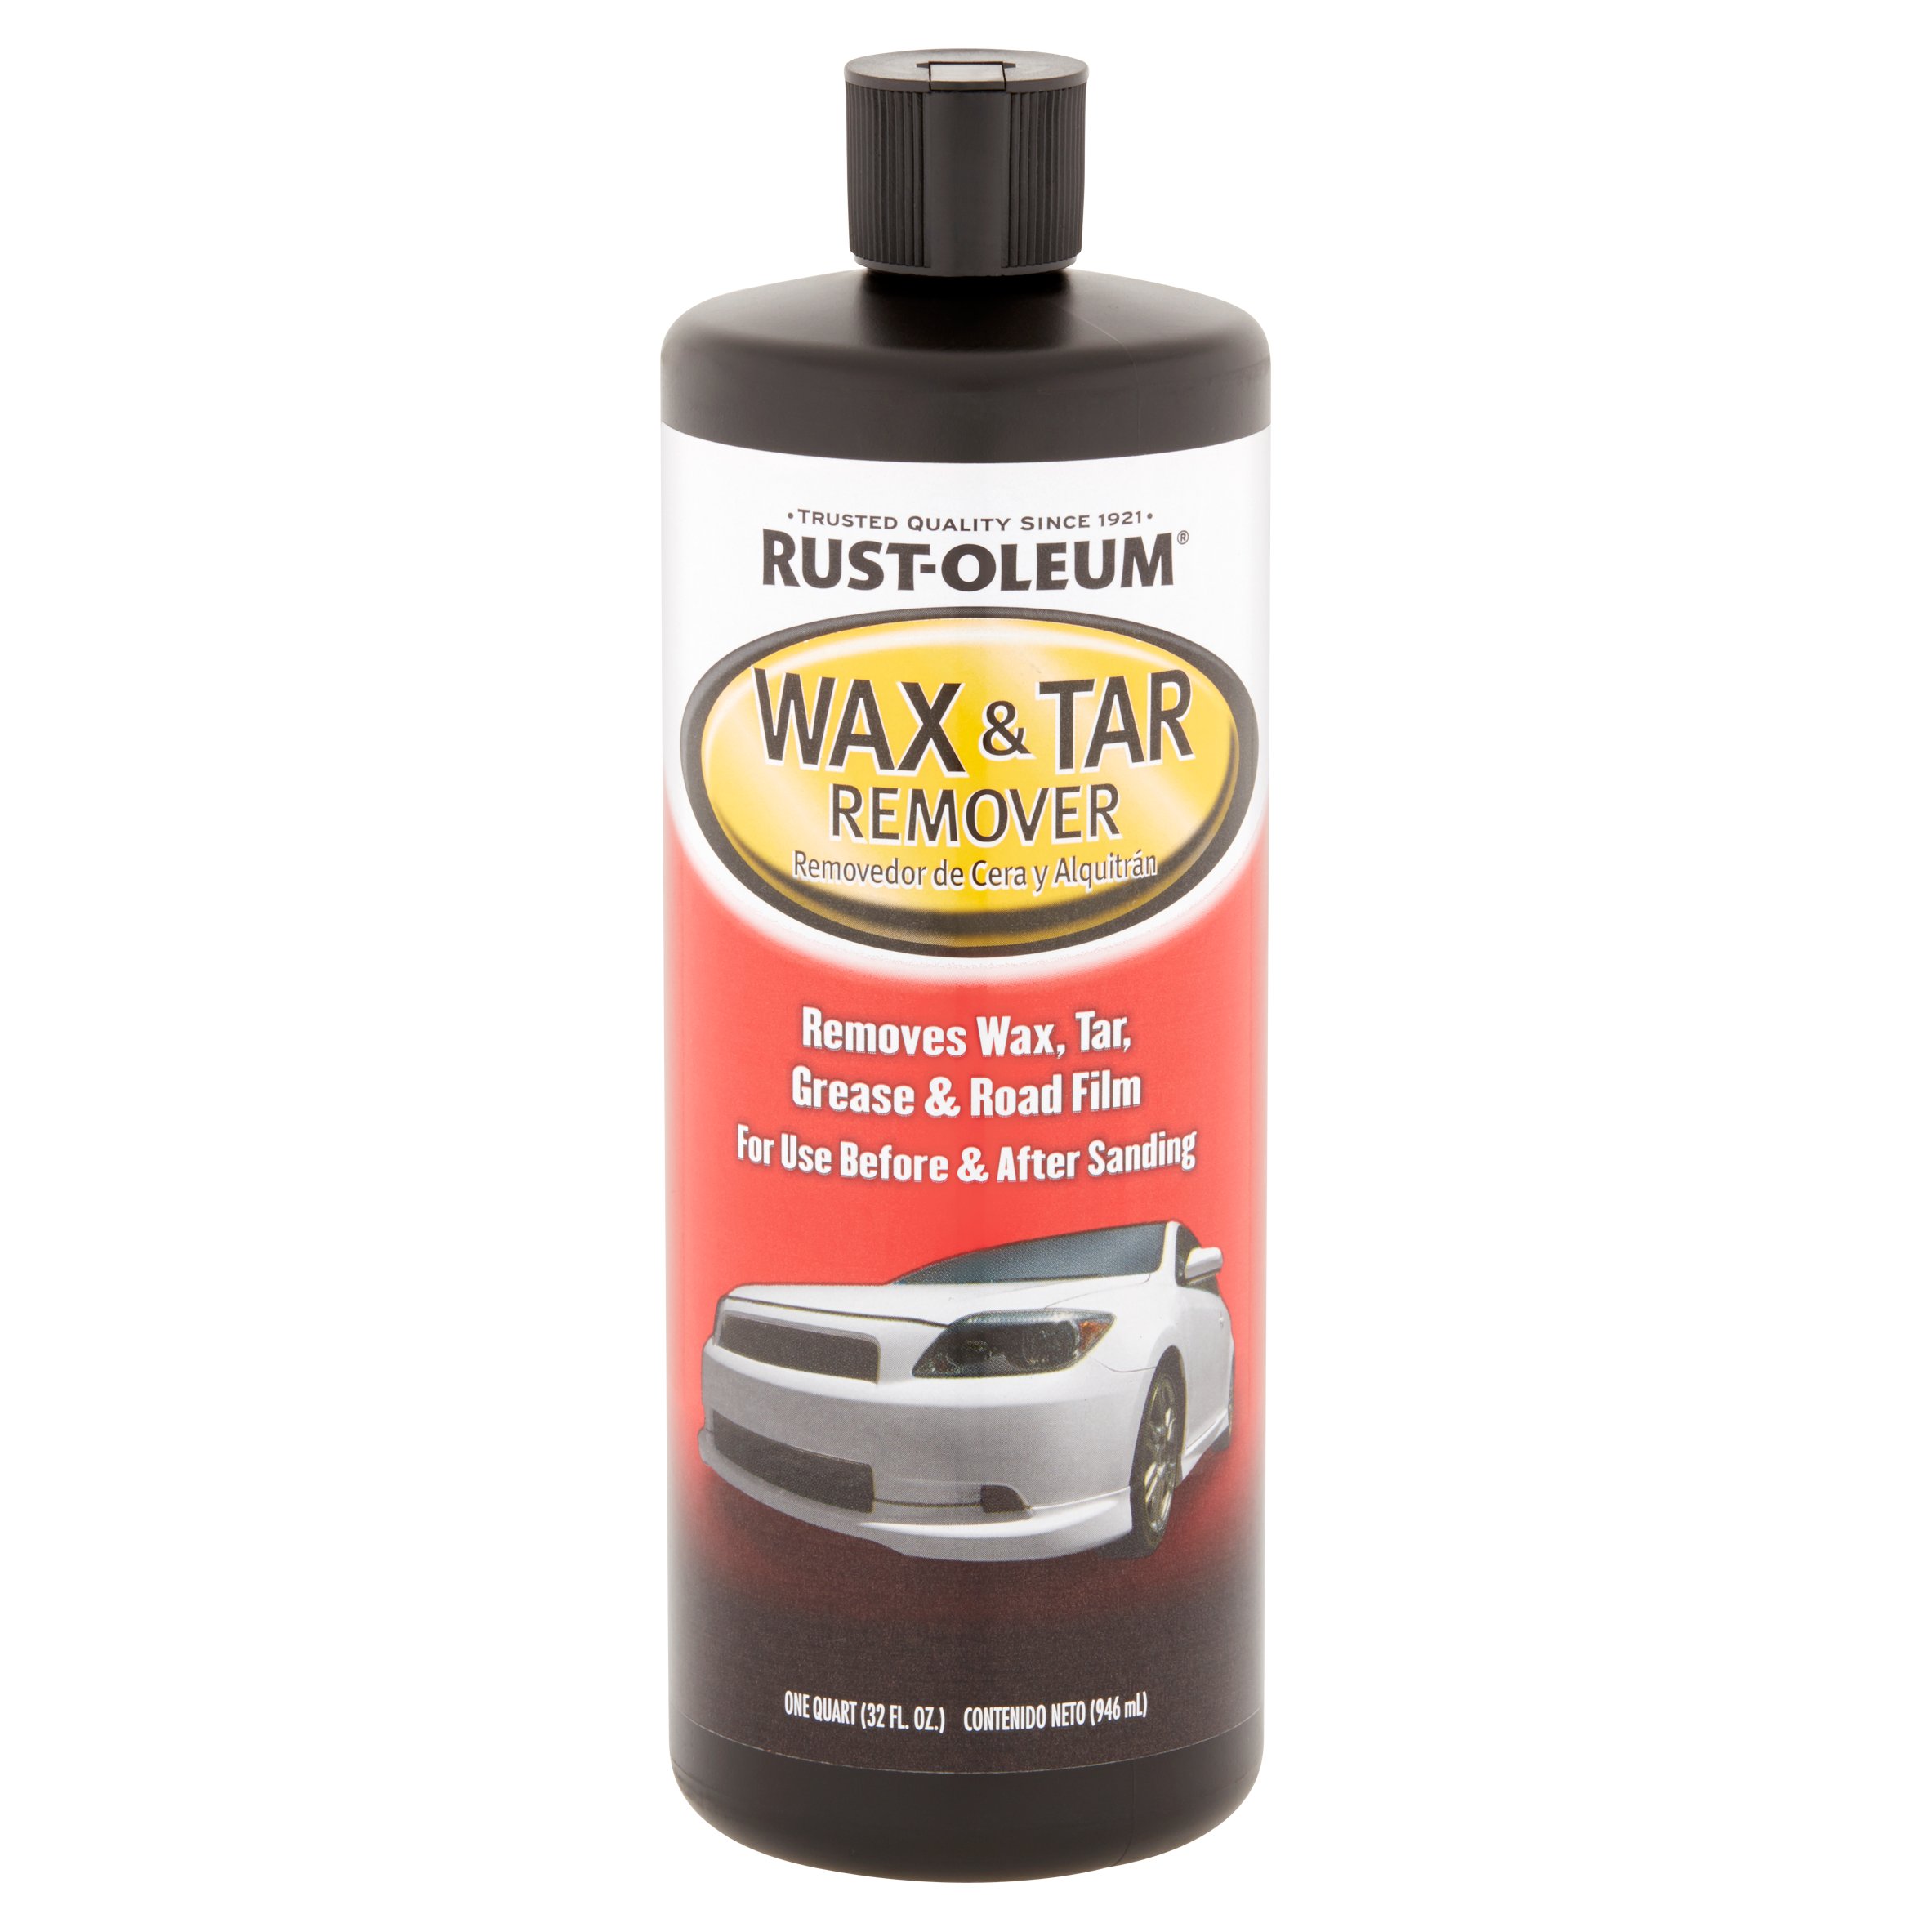 Rust-Oleum Automotive Wax and Tar Remover - image 2 of 5